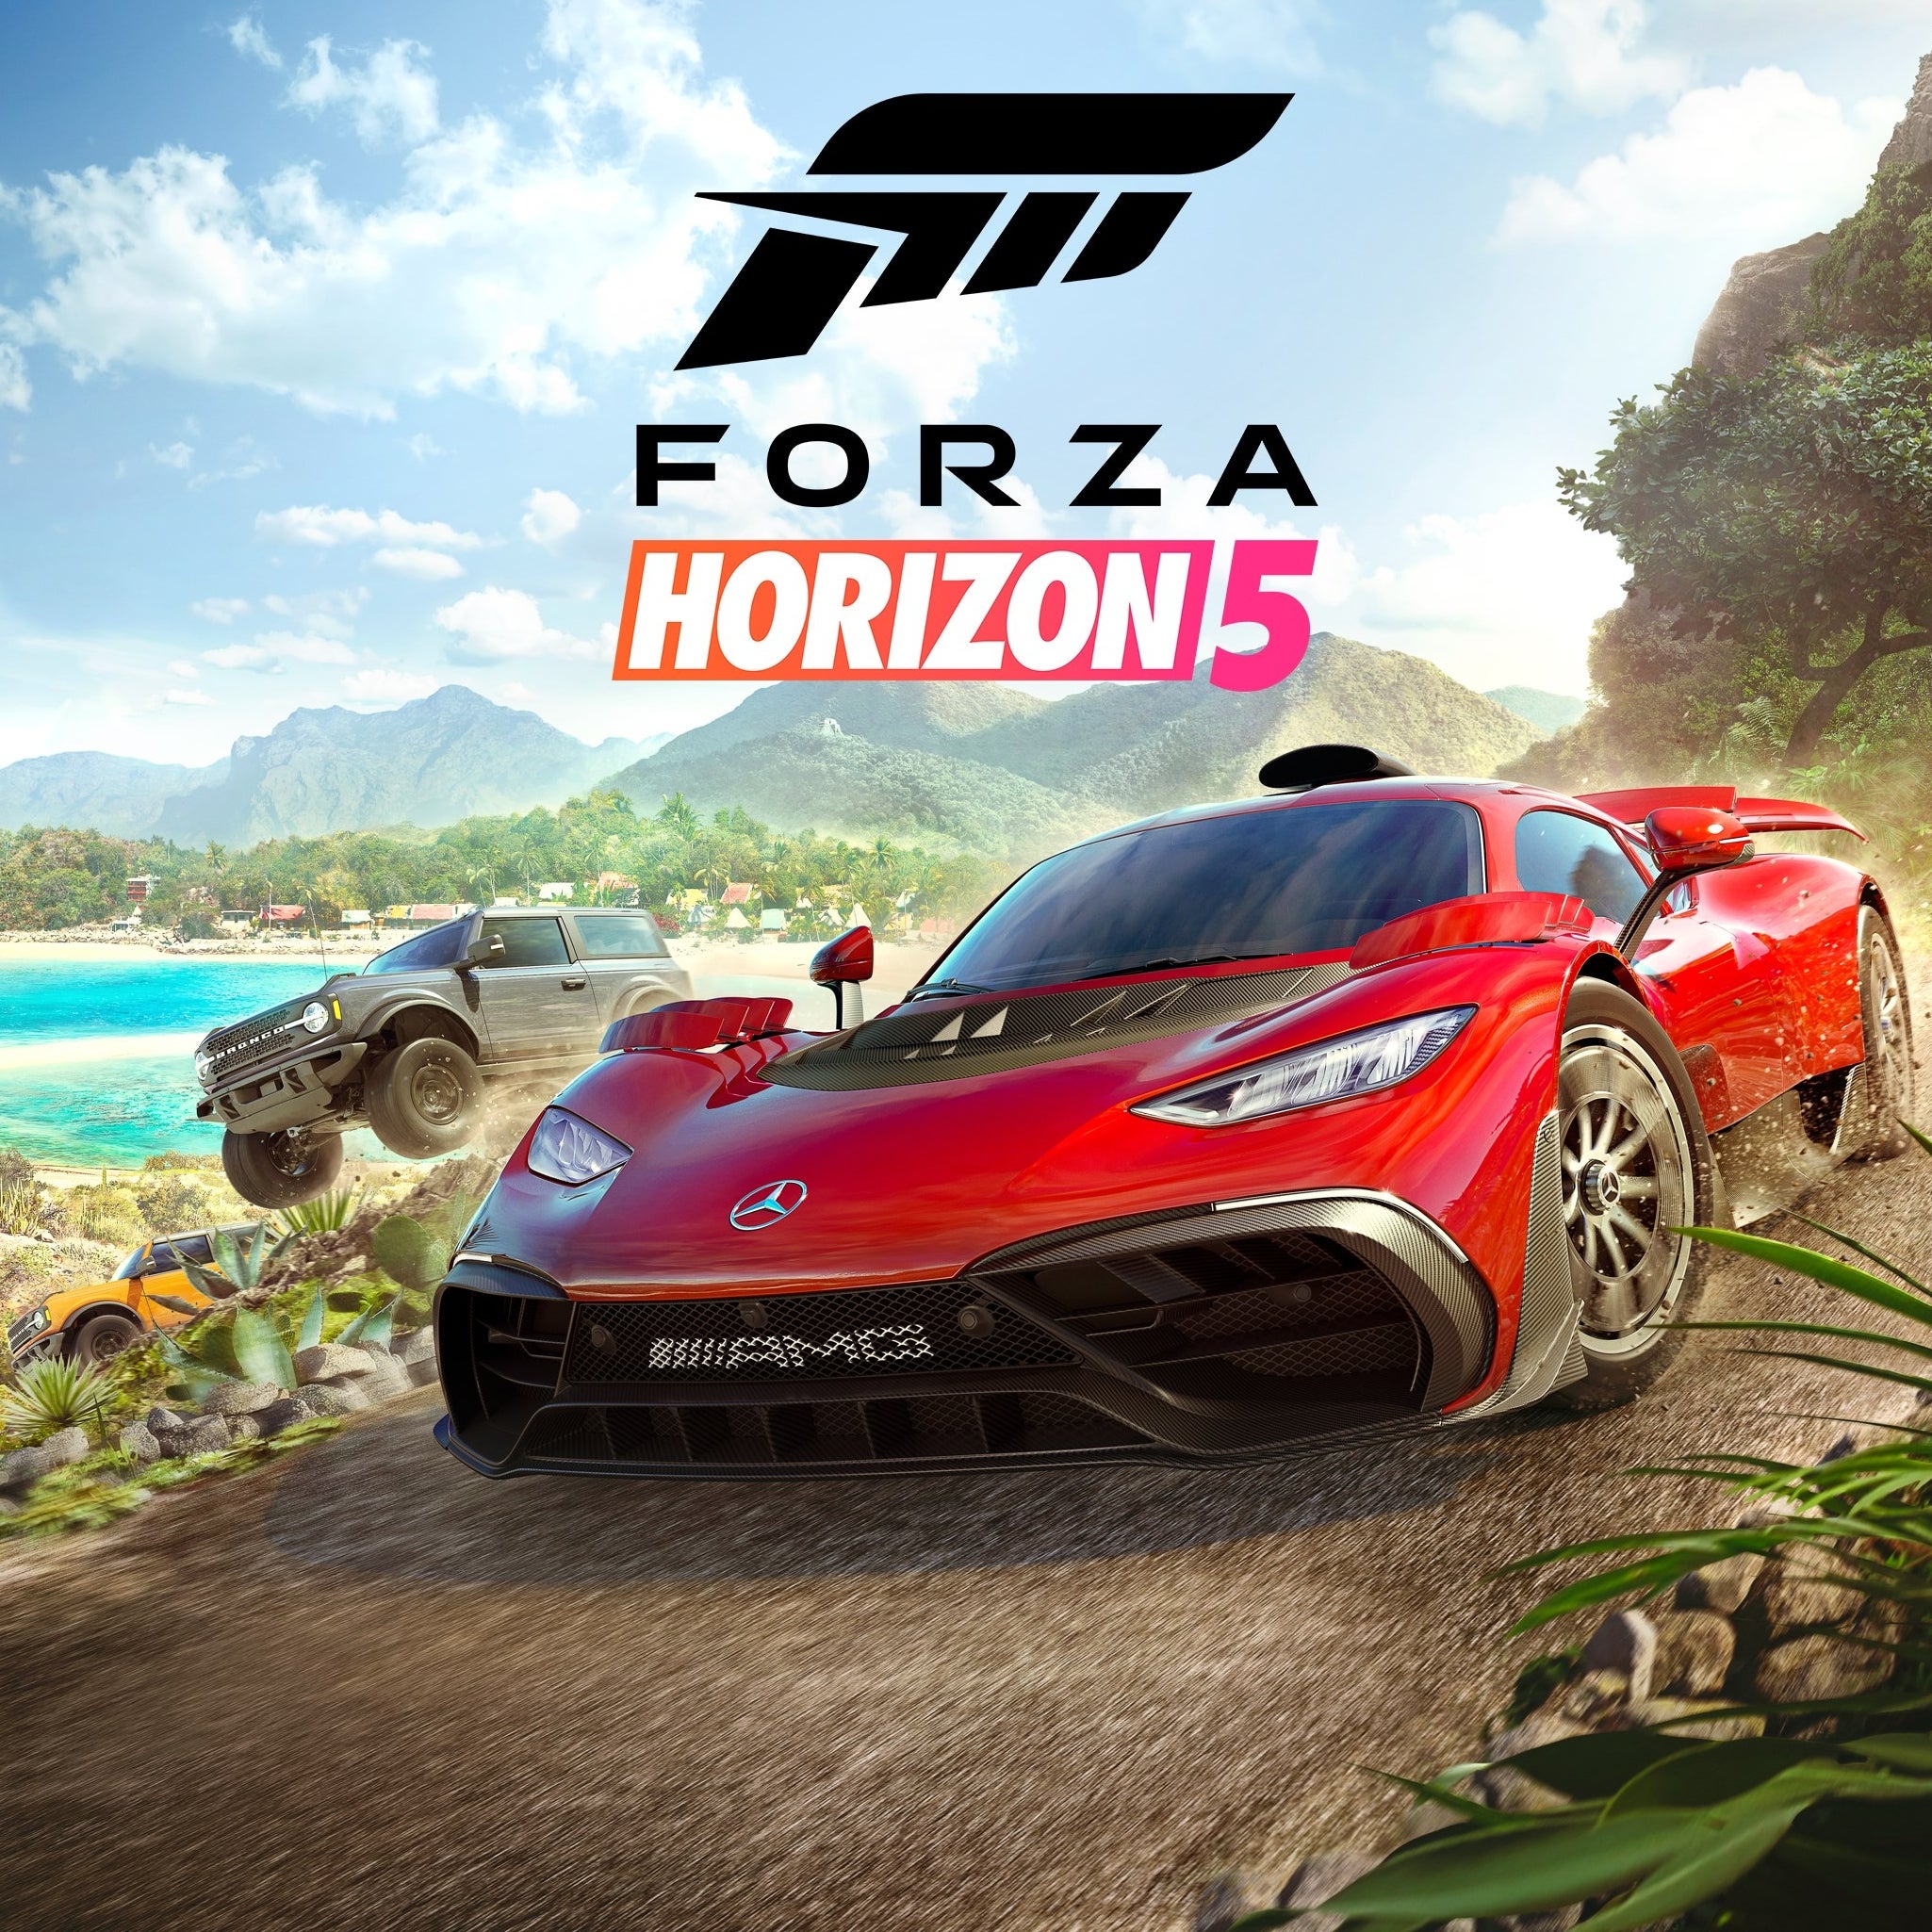 Forza Horizon 5-The Best Racing Game Till Date